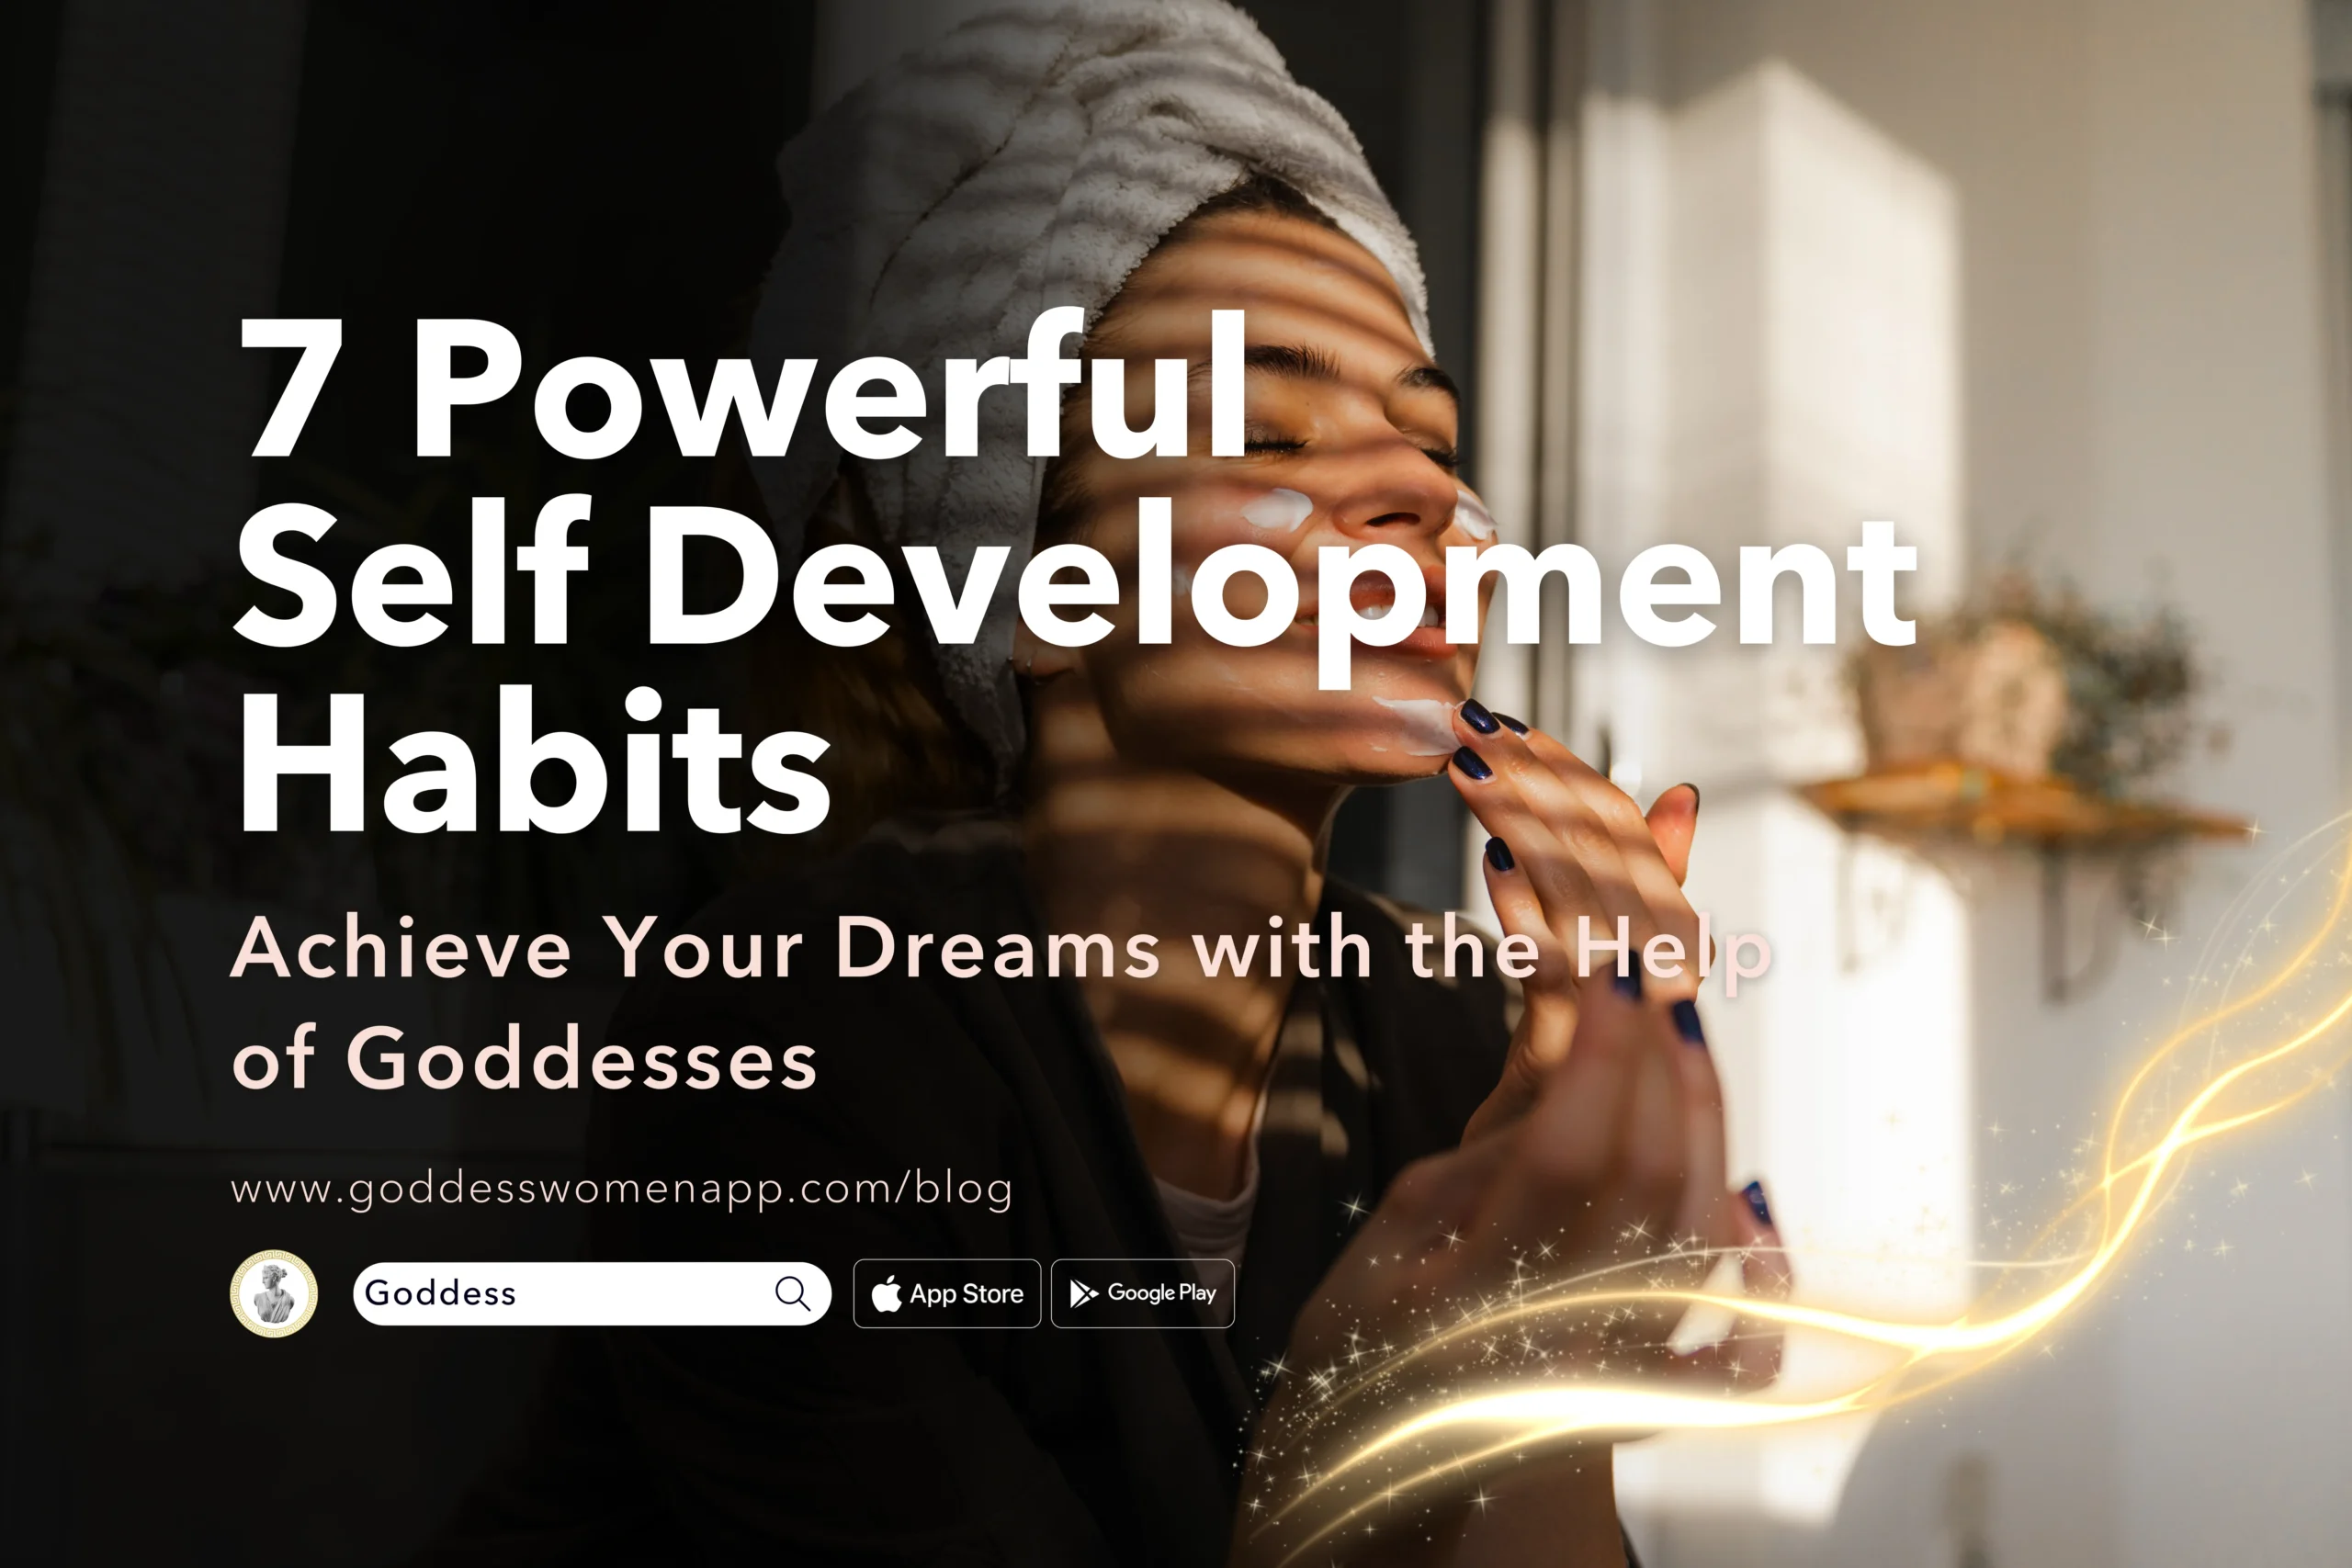 7 Powerful Self Development Habits to Achieve Your Dreams with the Help of Goddesses